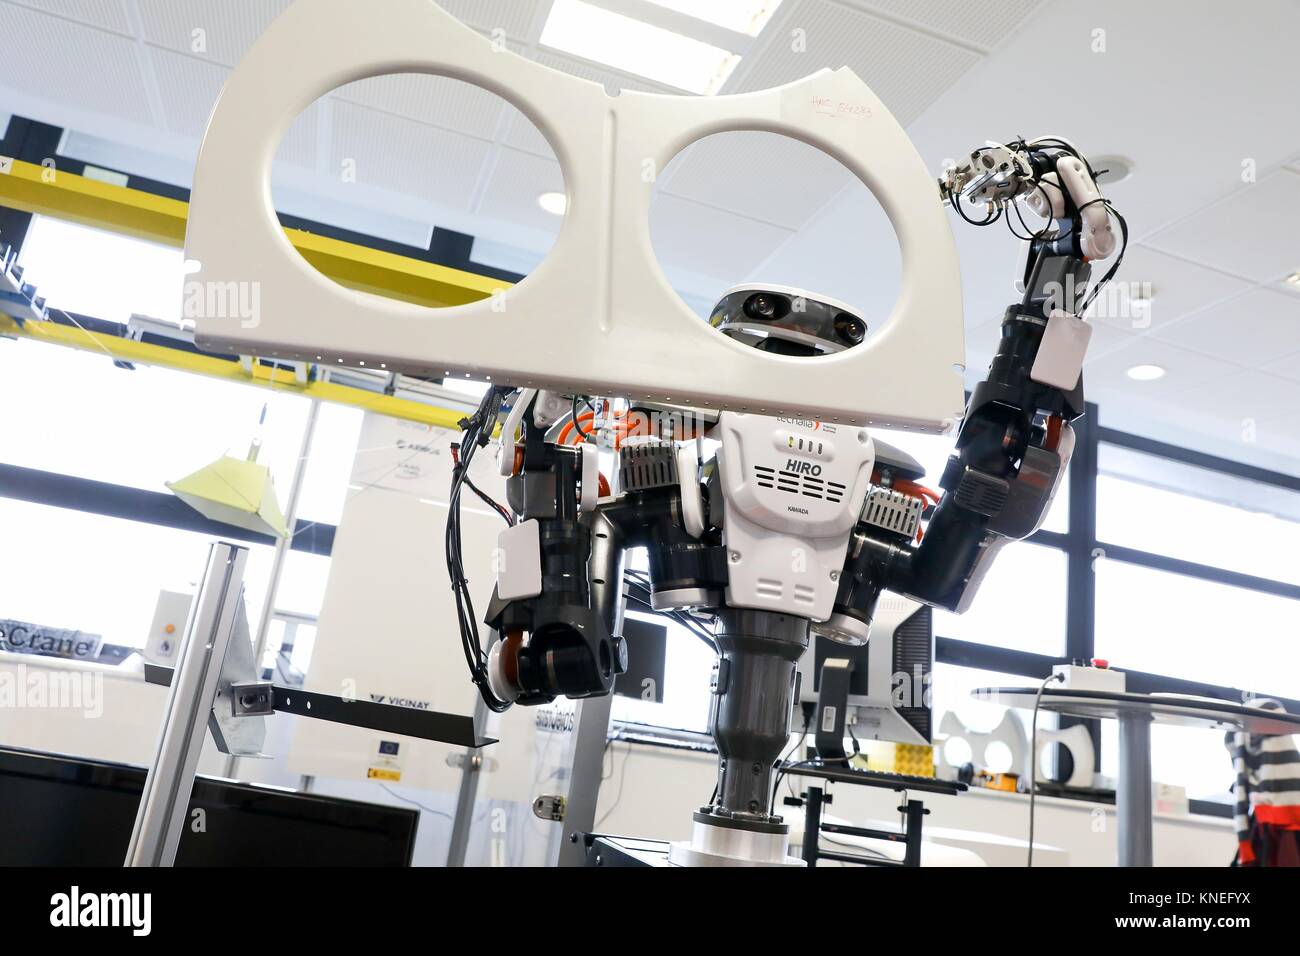 Robot with two arms for flexible robotics. Humanoid robot for automotive assembly tasks in collaboration with people, Industry, Tecnalia Research & Stock Photo